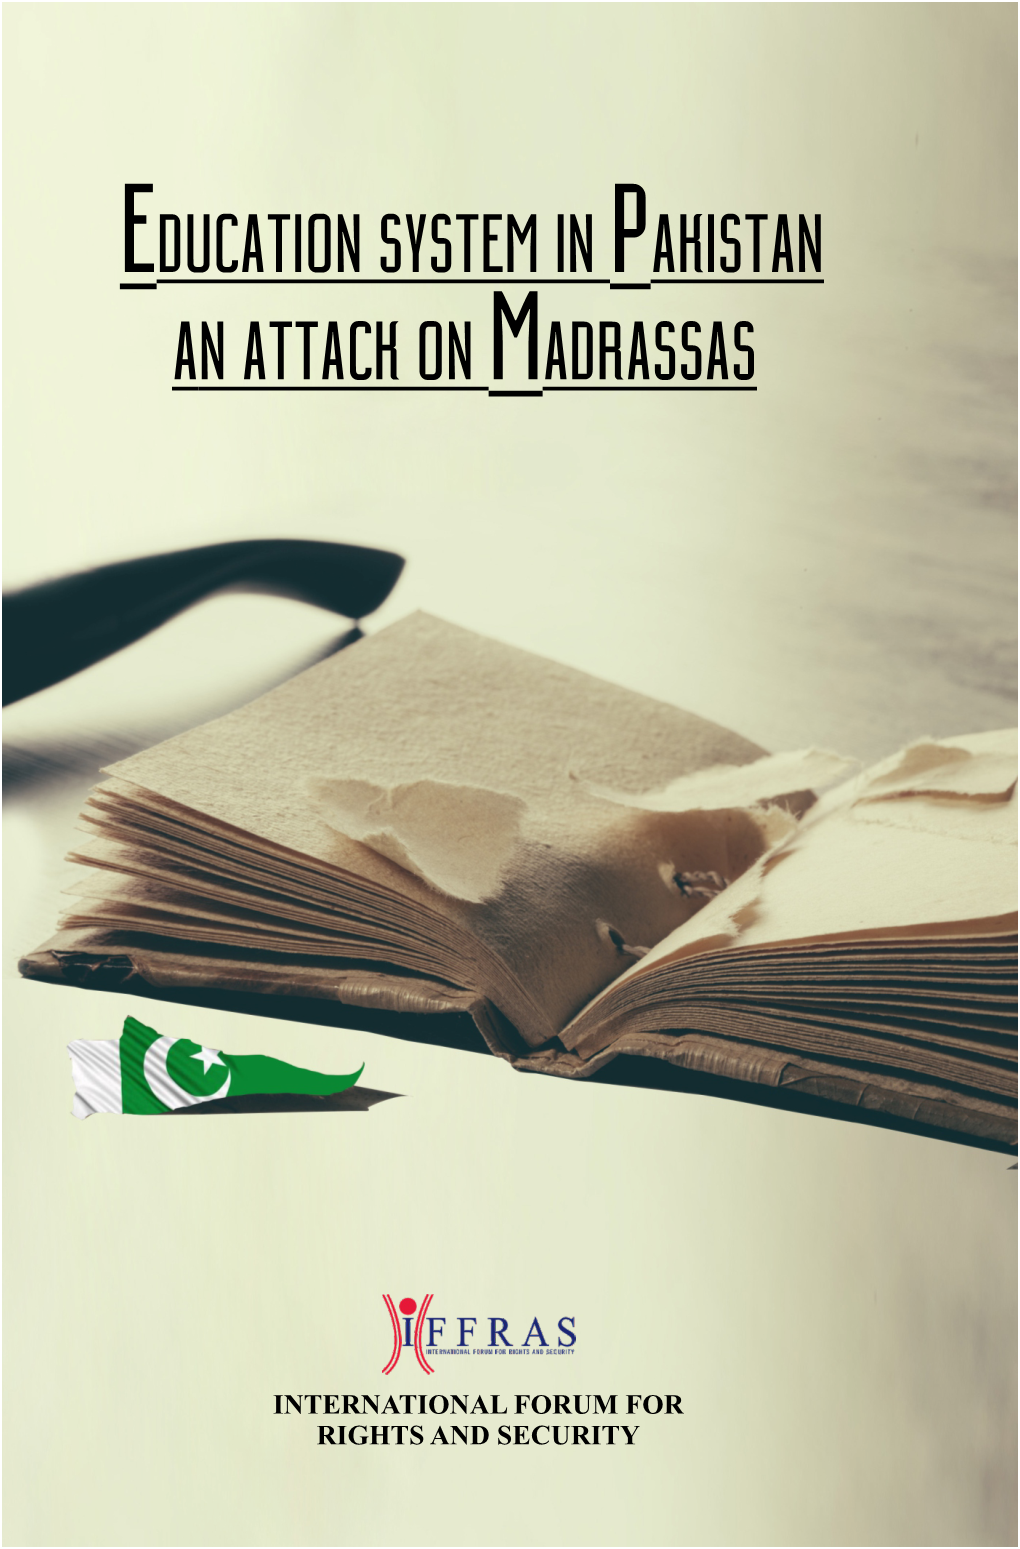 Education System in Pakistan an Attack on Madrassas